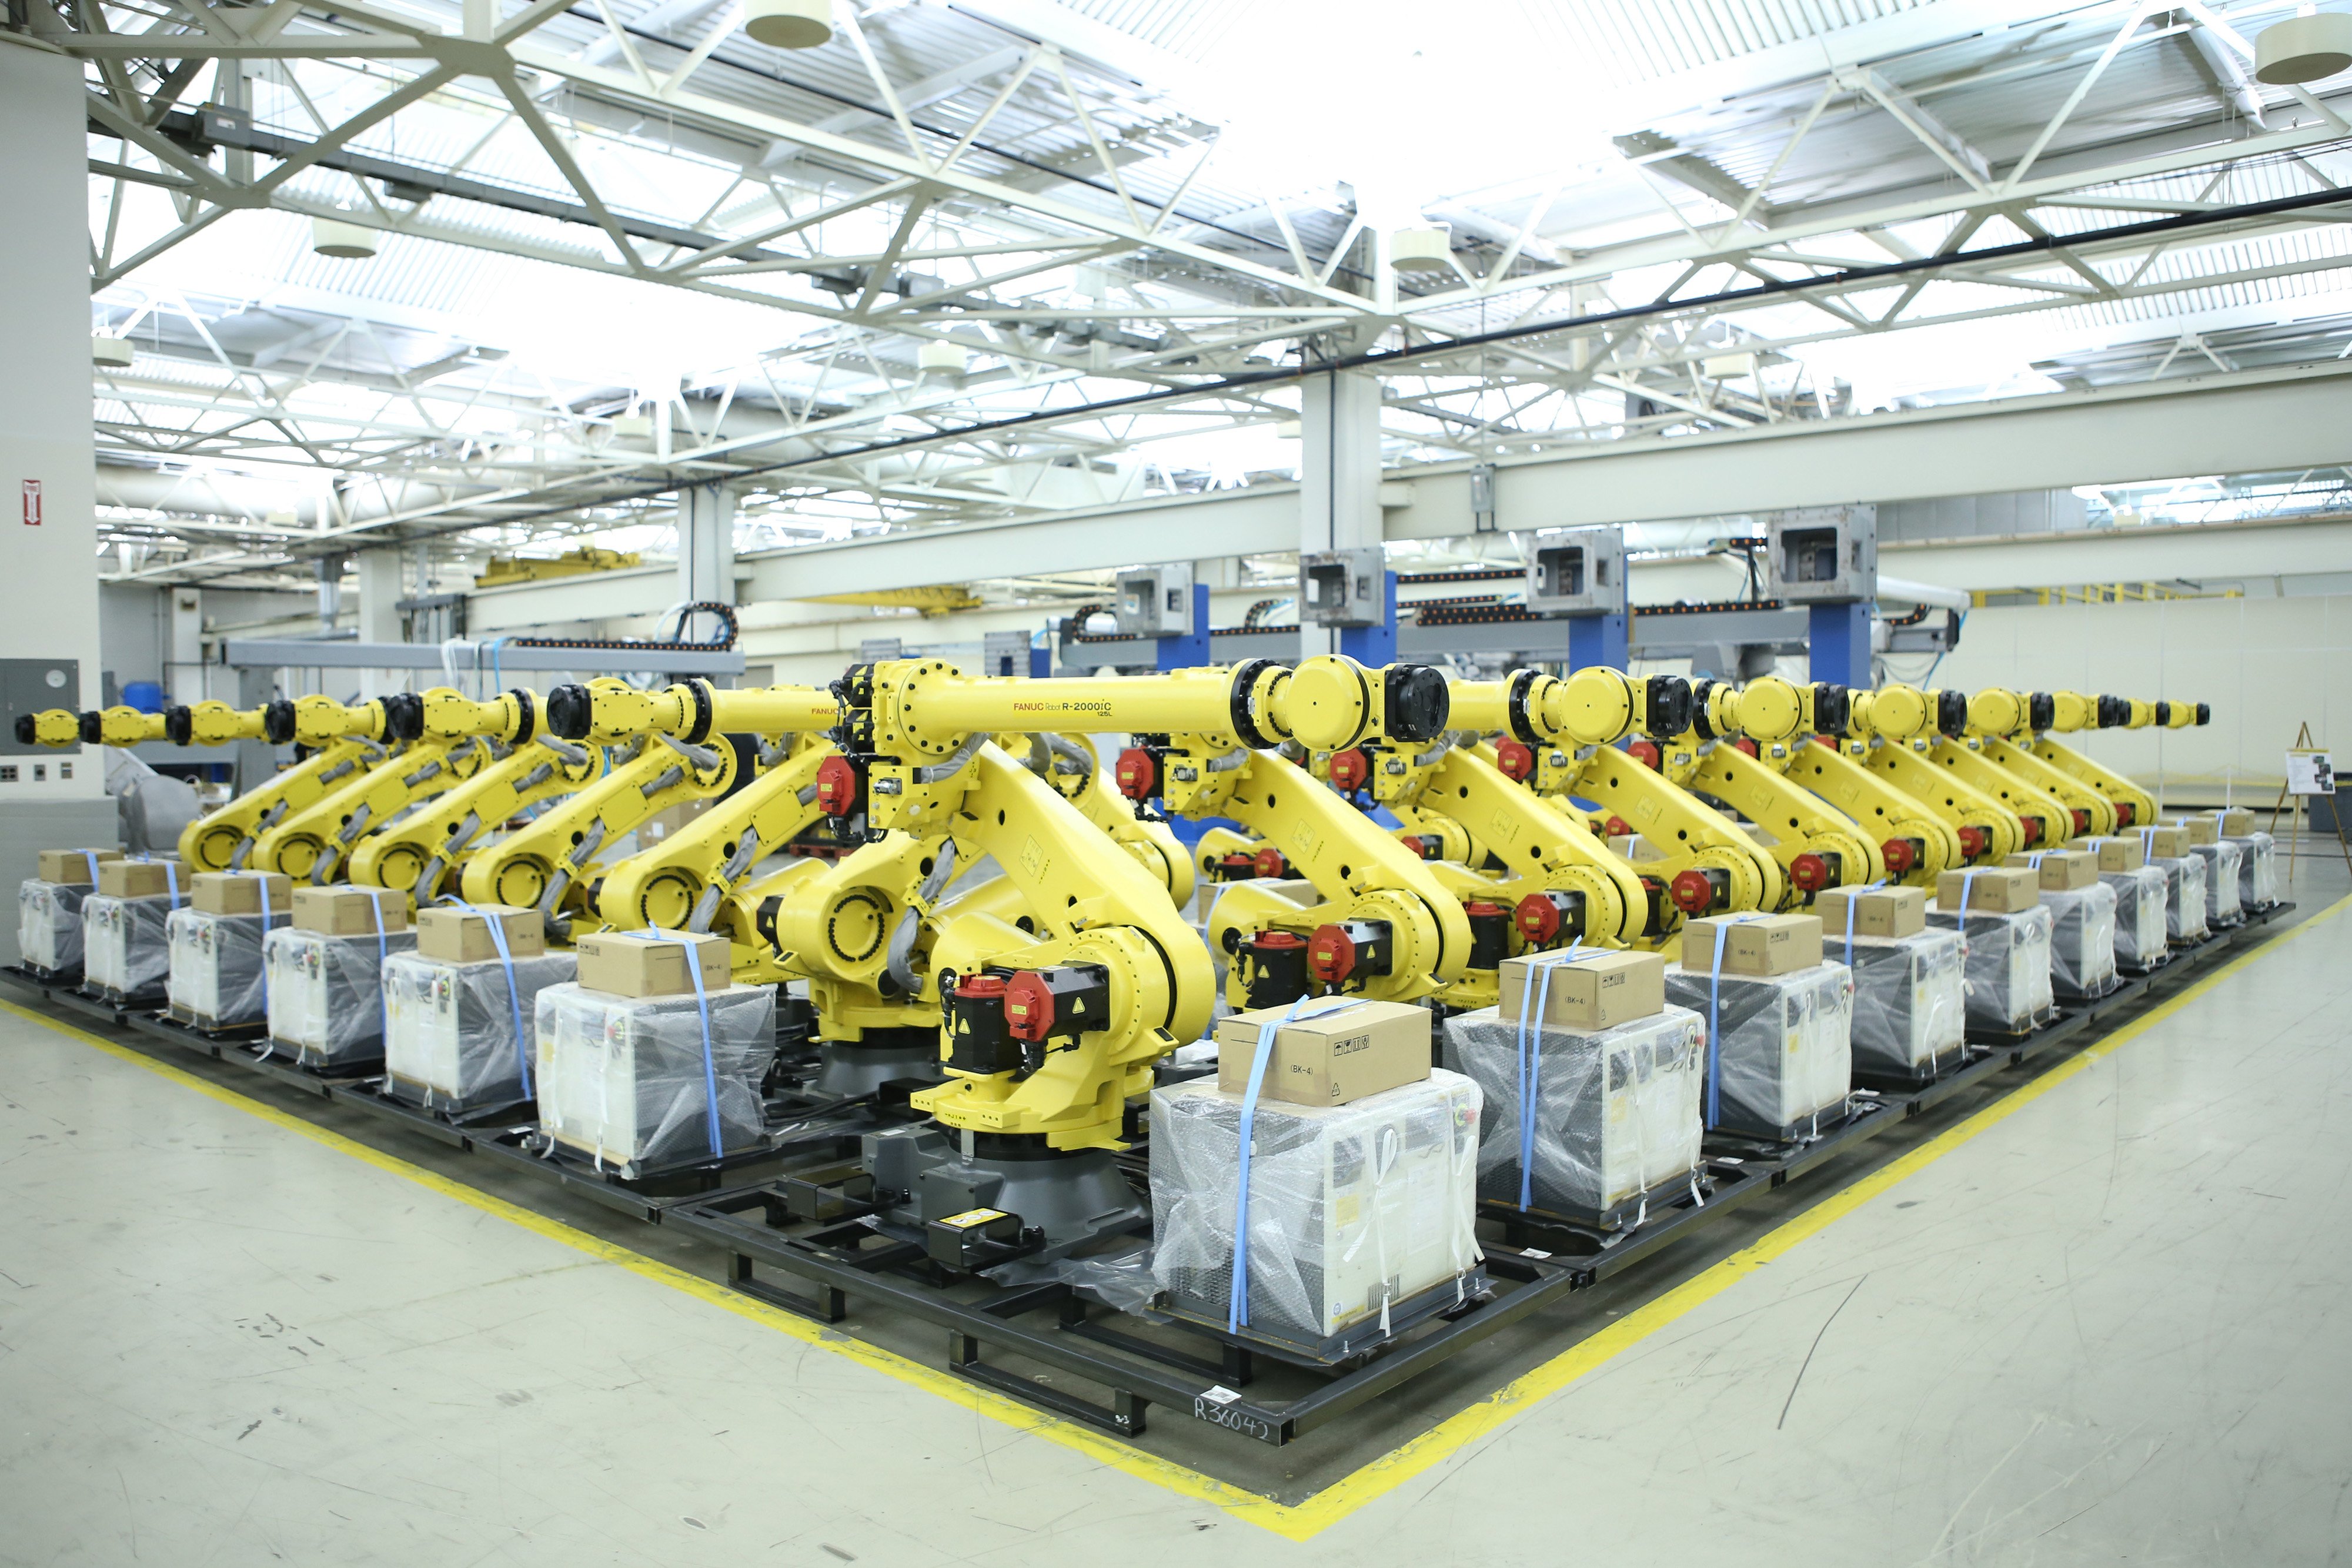 FANUC America Twitter: "Our #robots are ready to handle your most challenging #manufacturing operations - Backed by 24/7/365 service &amp; support for all FANUC products. Use our handy #Robot Finder